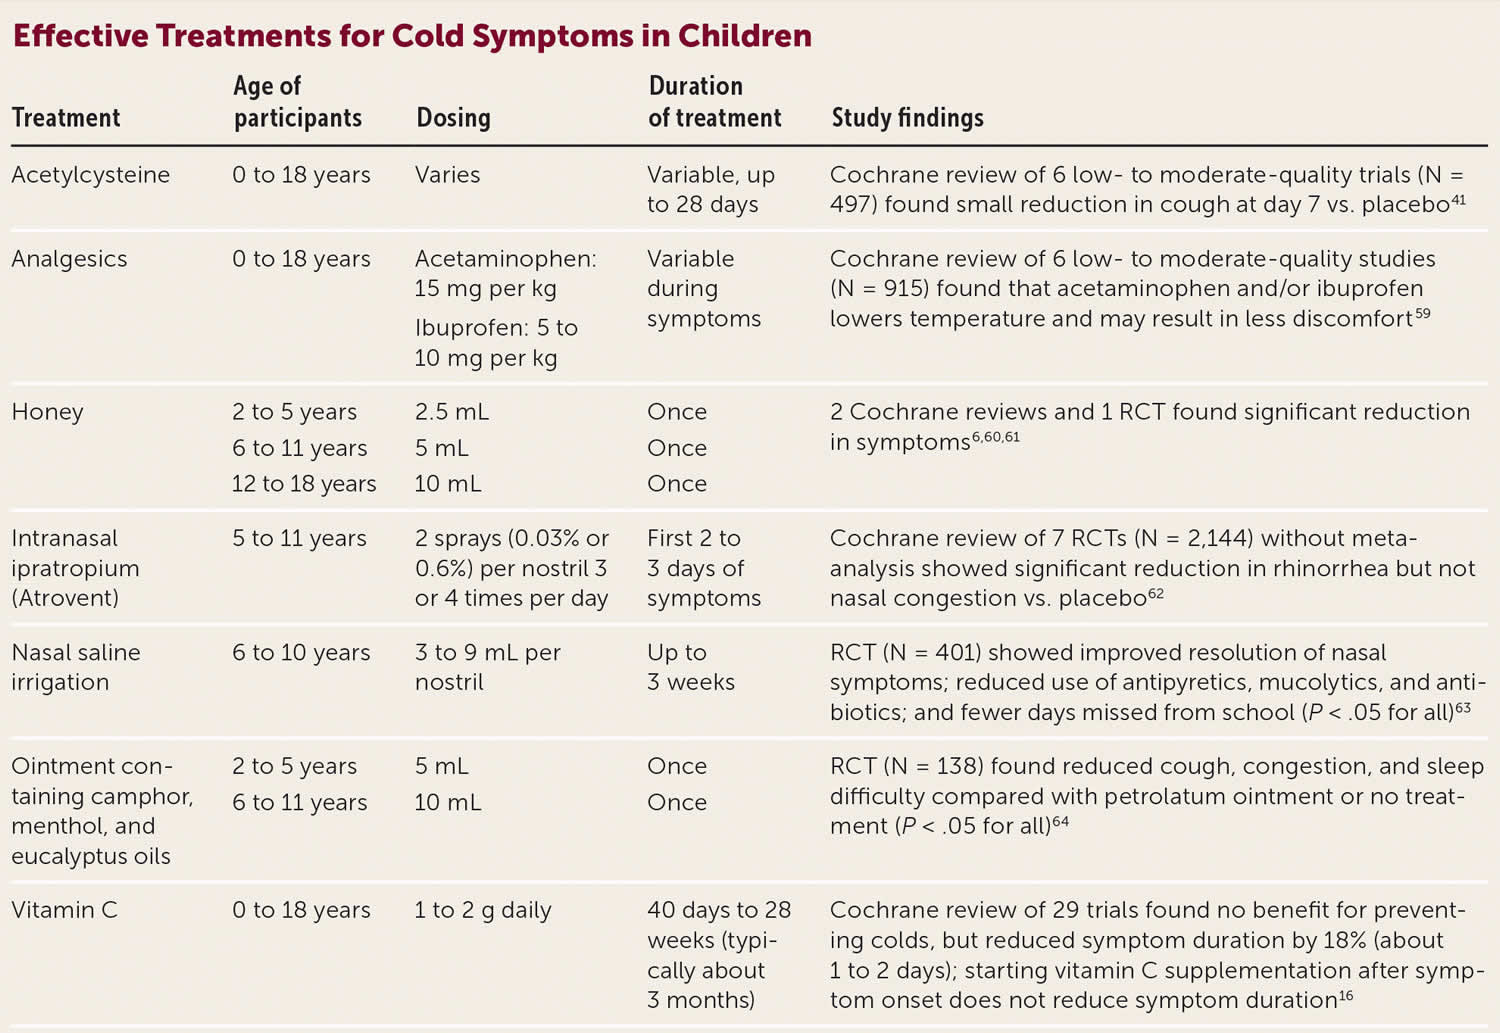 Effective treatments for cold symptoms in children